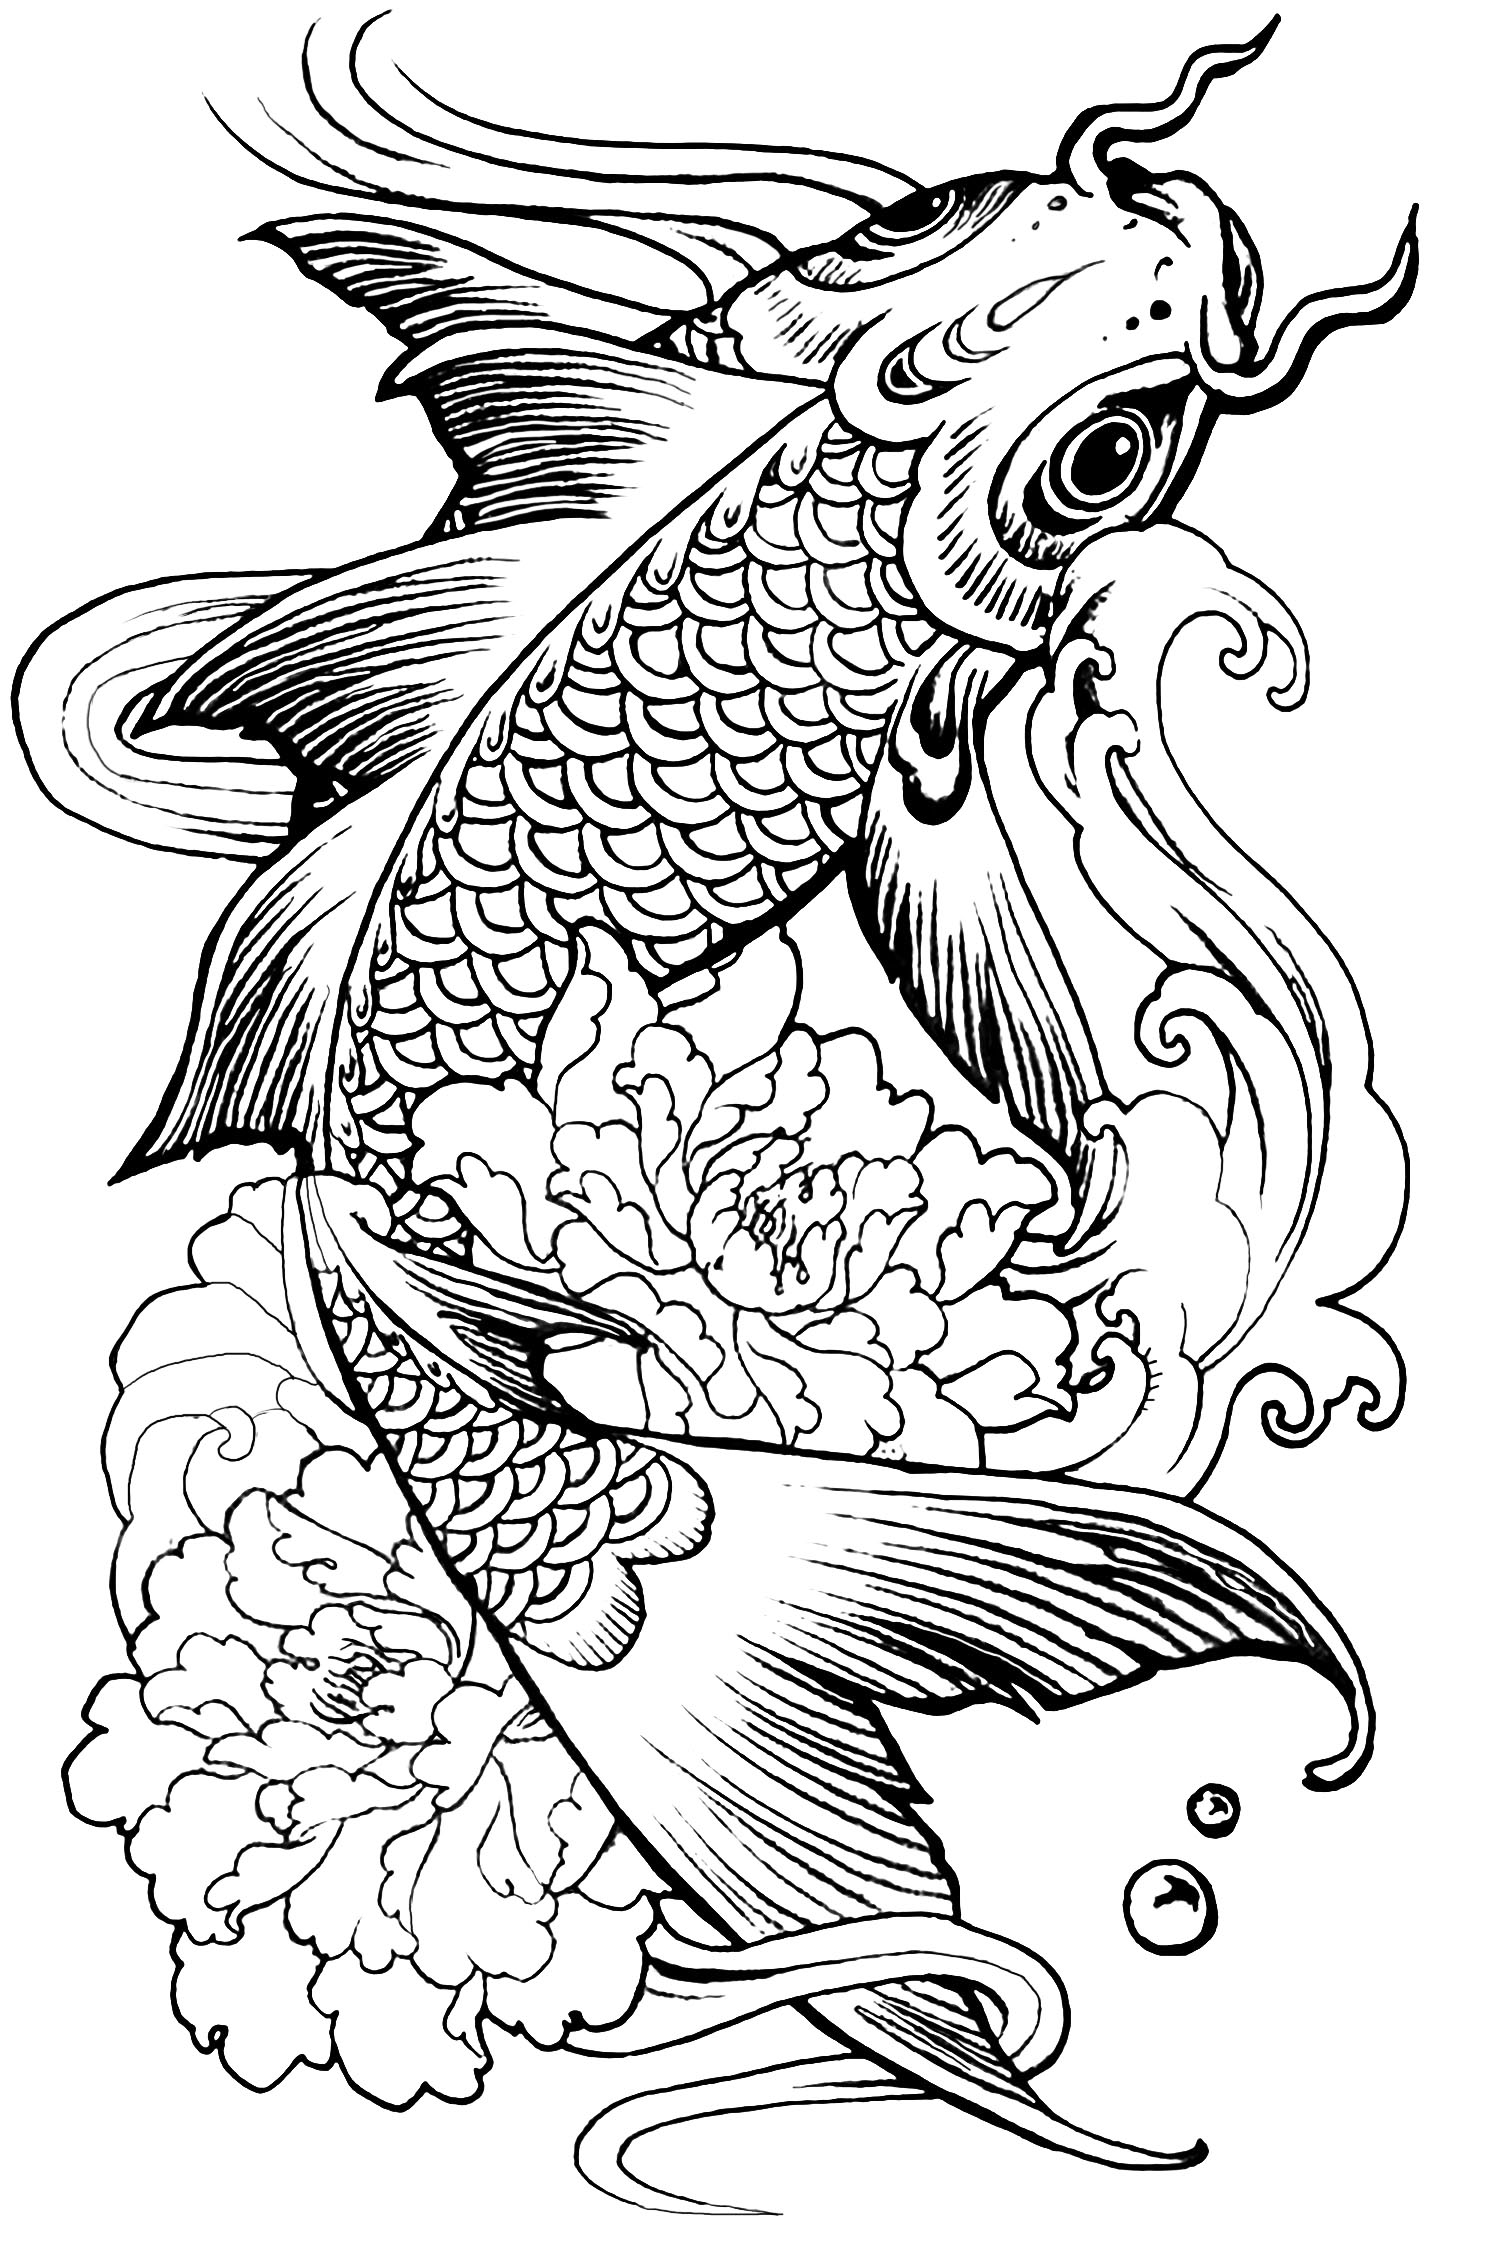 Pisces free to color for children - Pisces Kids Coloring Pages